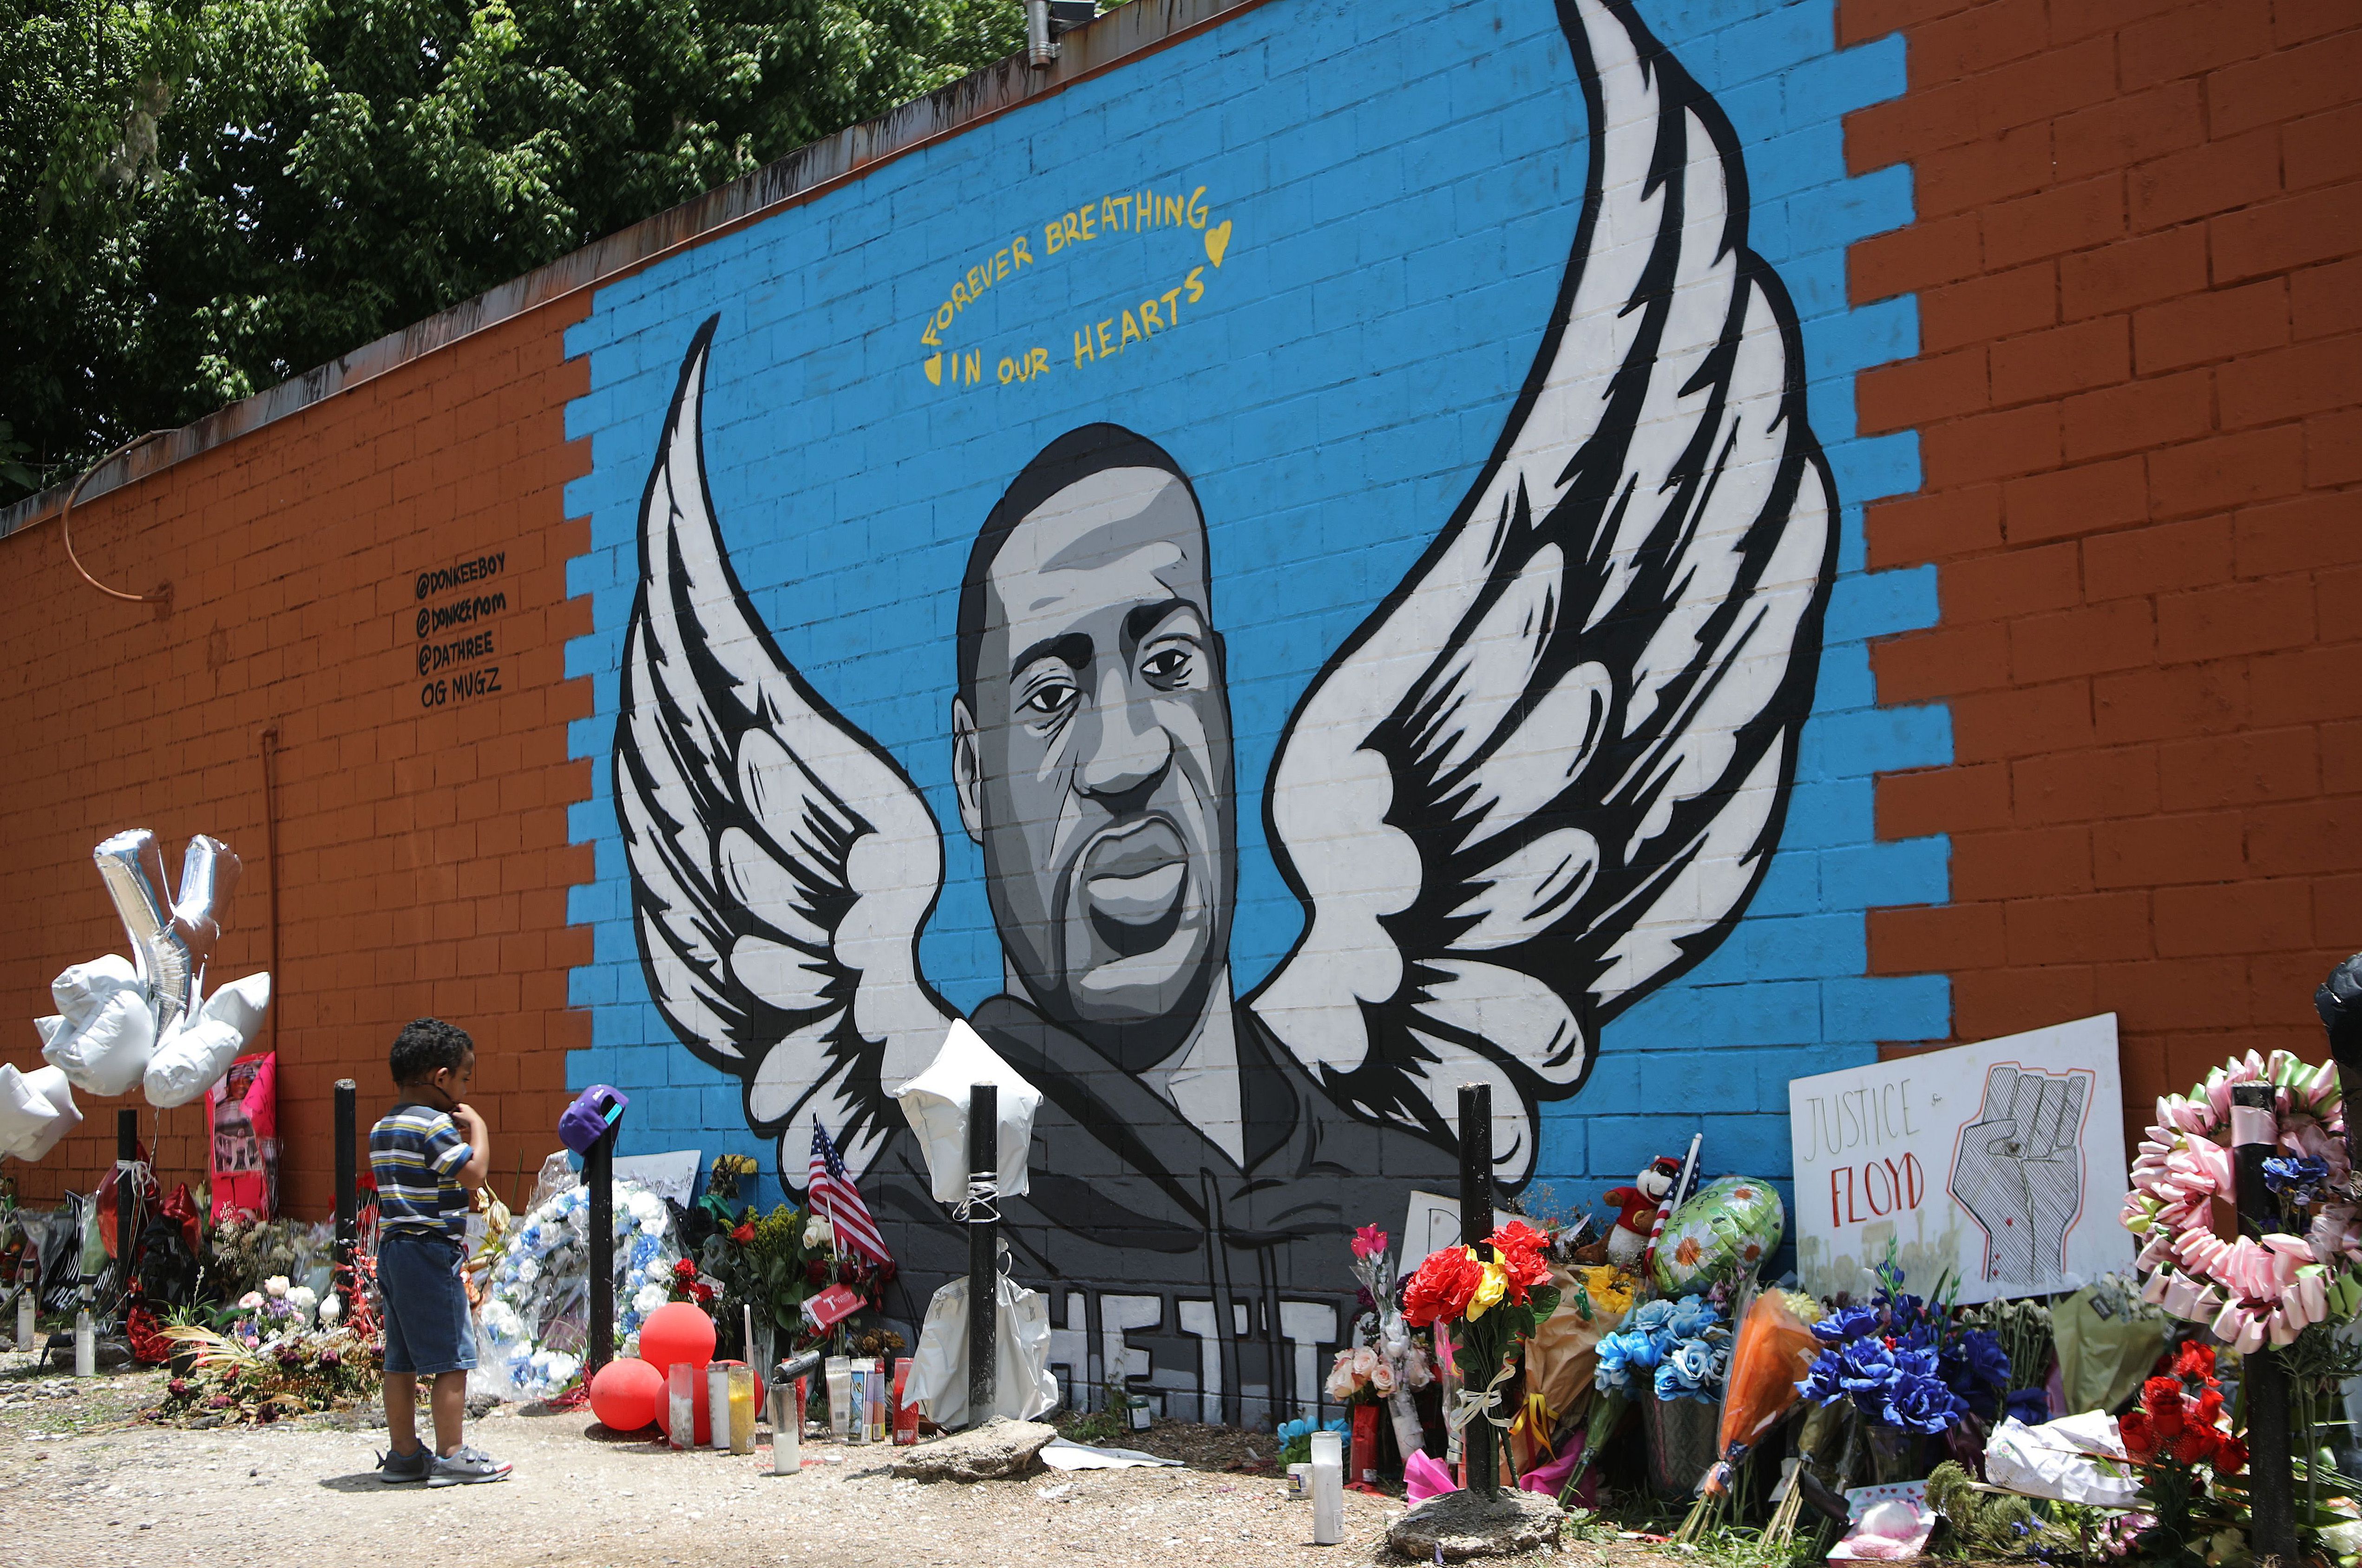 A child views a mural dedicated to George Floyd, across the street from the Cuney Homes housing project in Houston's Third Ward, where Floyd grew up and later mentored young men, on June 10, 2020 in Houston, Texas.